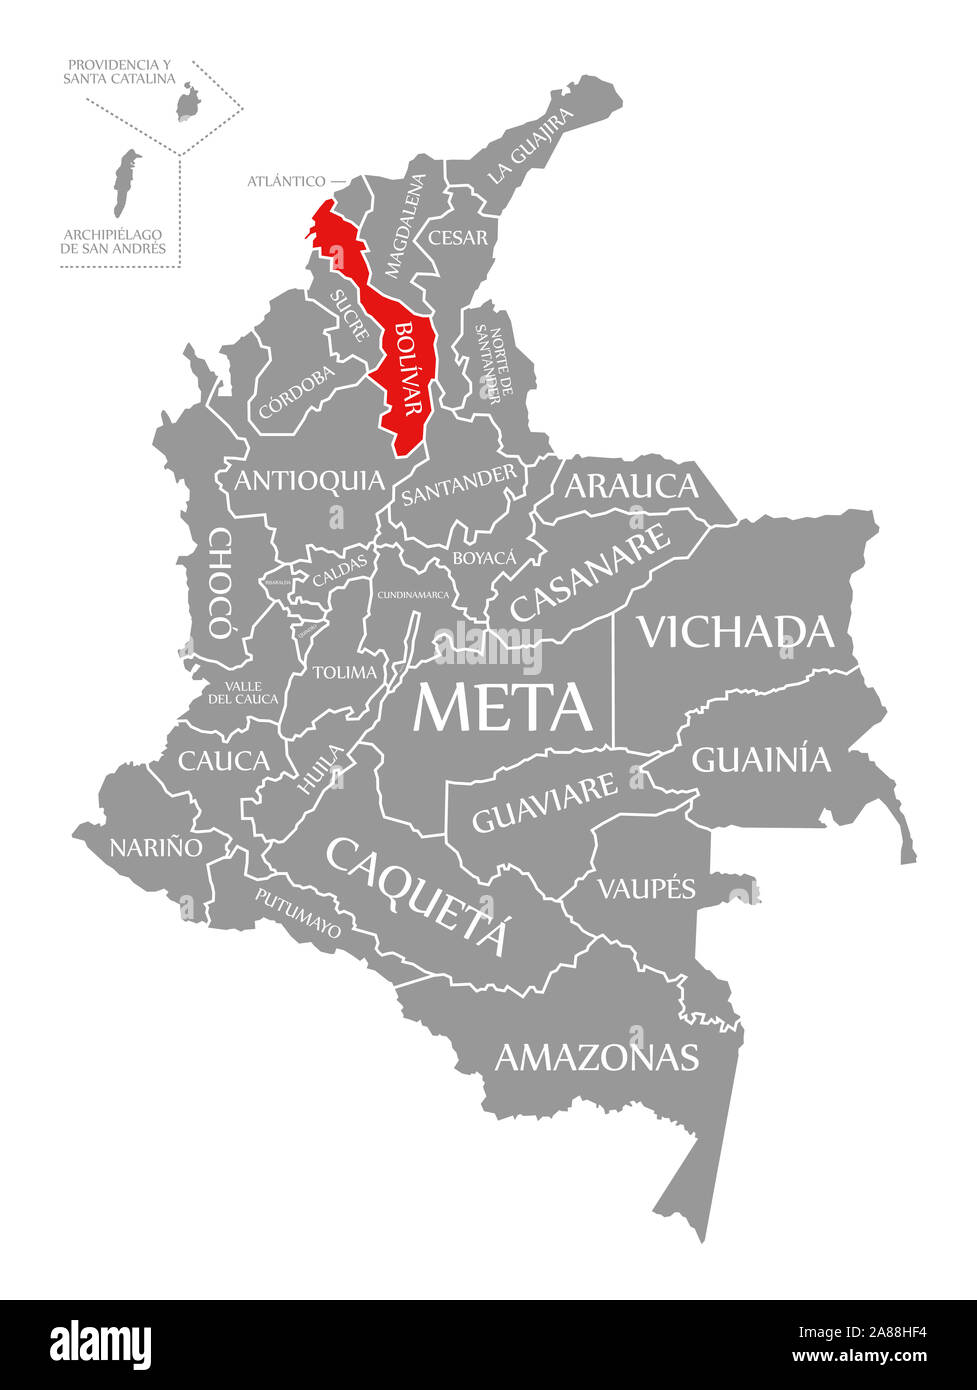 Bolivar red highlighted in map of Colombia Stock Photo